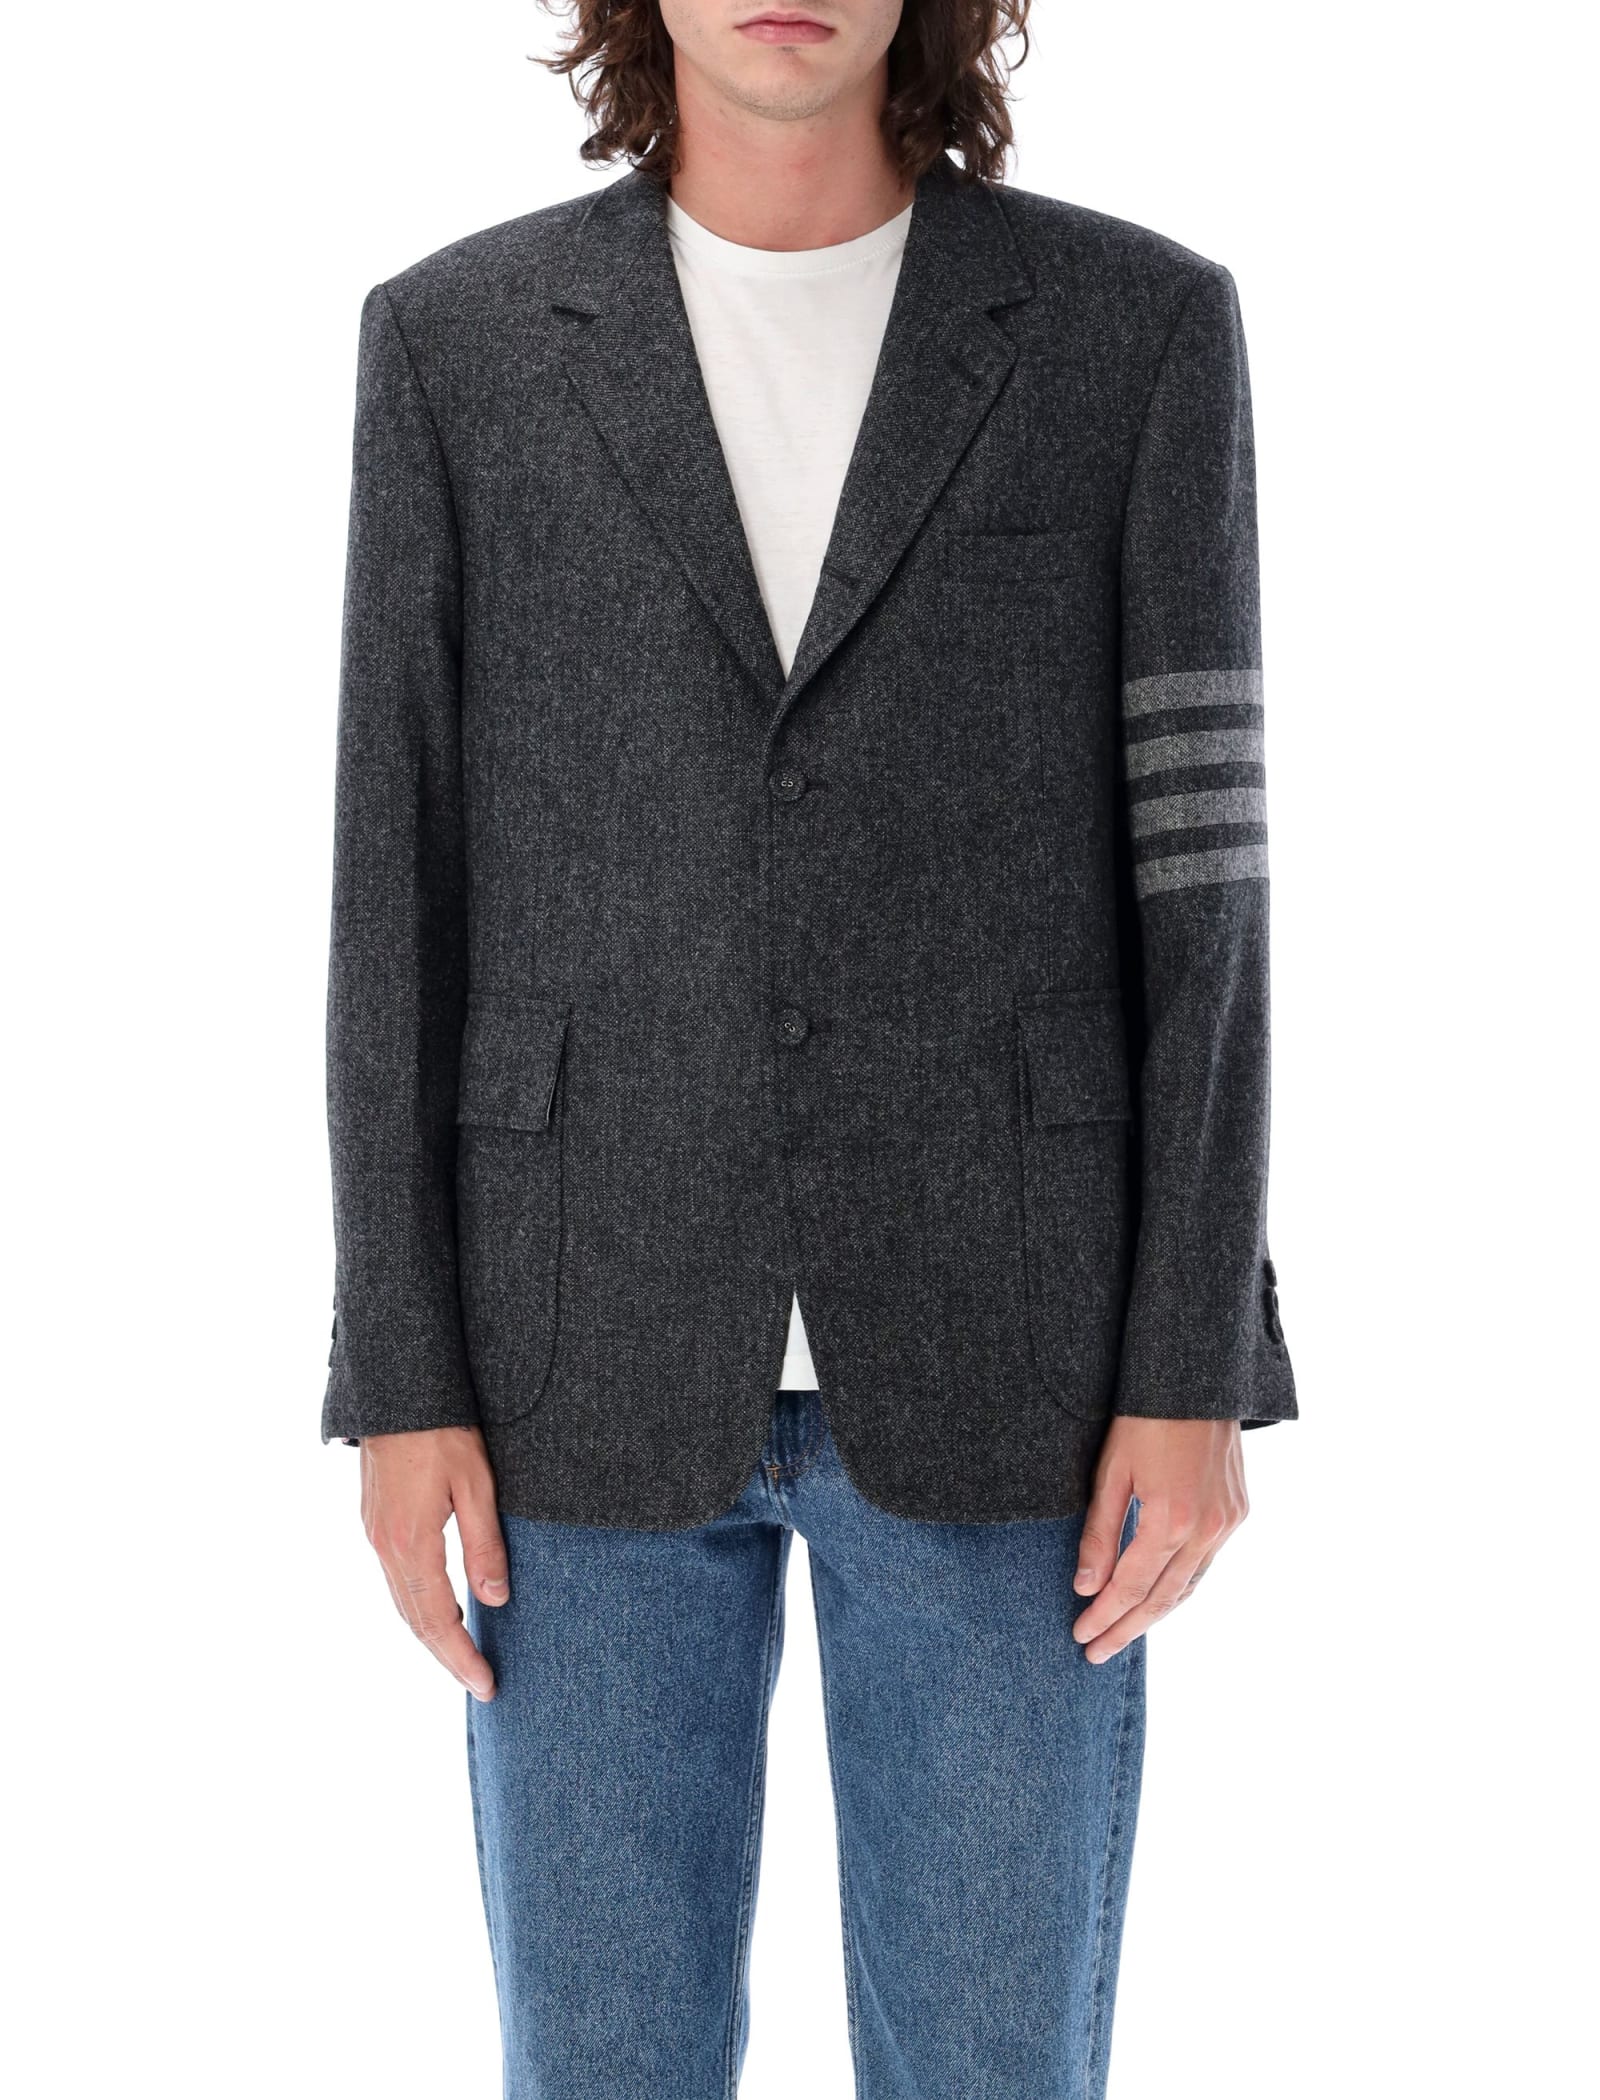 THOM BROWNE UNSTRUCTURED STRAIGHT FIT FORMAL JACKET